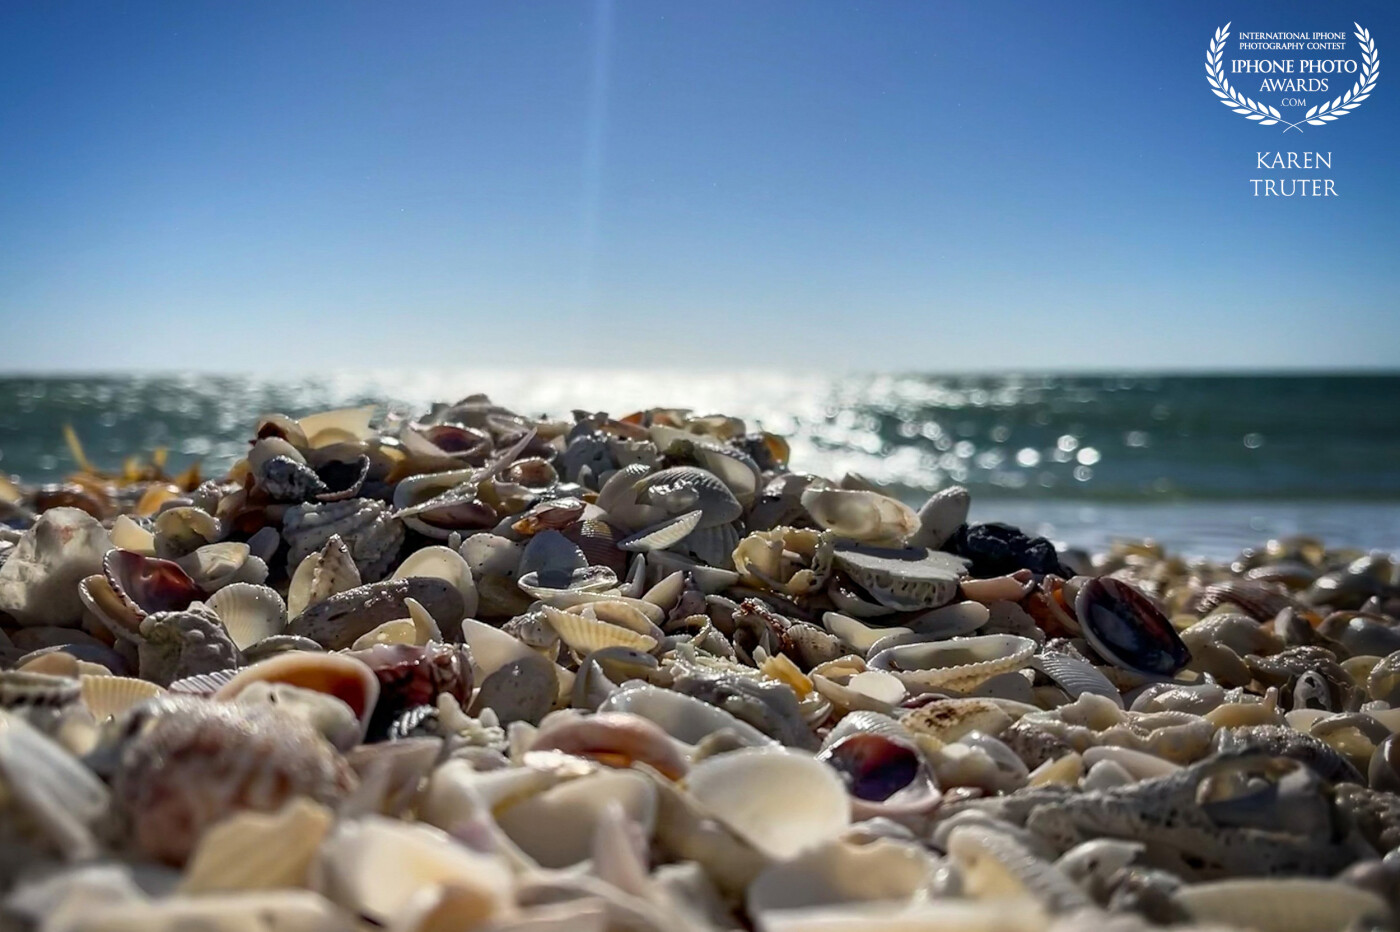 For this photograph, I turned my iPhone upside down and rested it on the shells and focussed on the middle ground to obtain this depth of field. I love how the sunbeam provides a leading line to the shells.